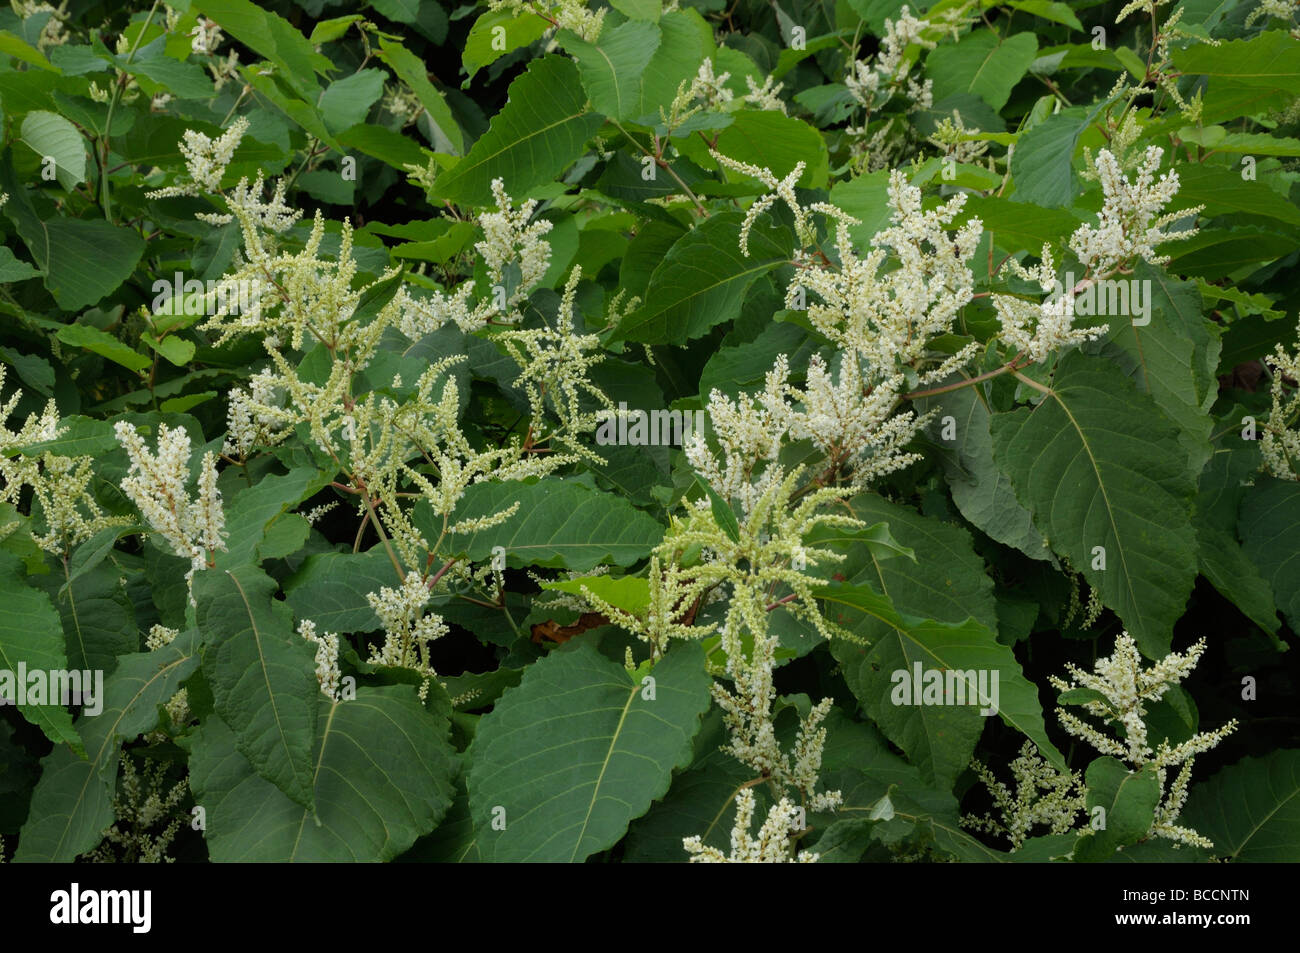 Japanese Knotweed (Fallopia japonica), flowering twigs Stock Photo